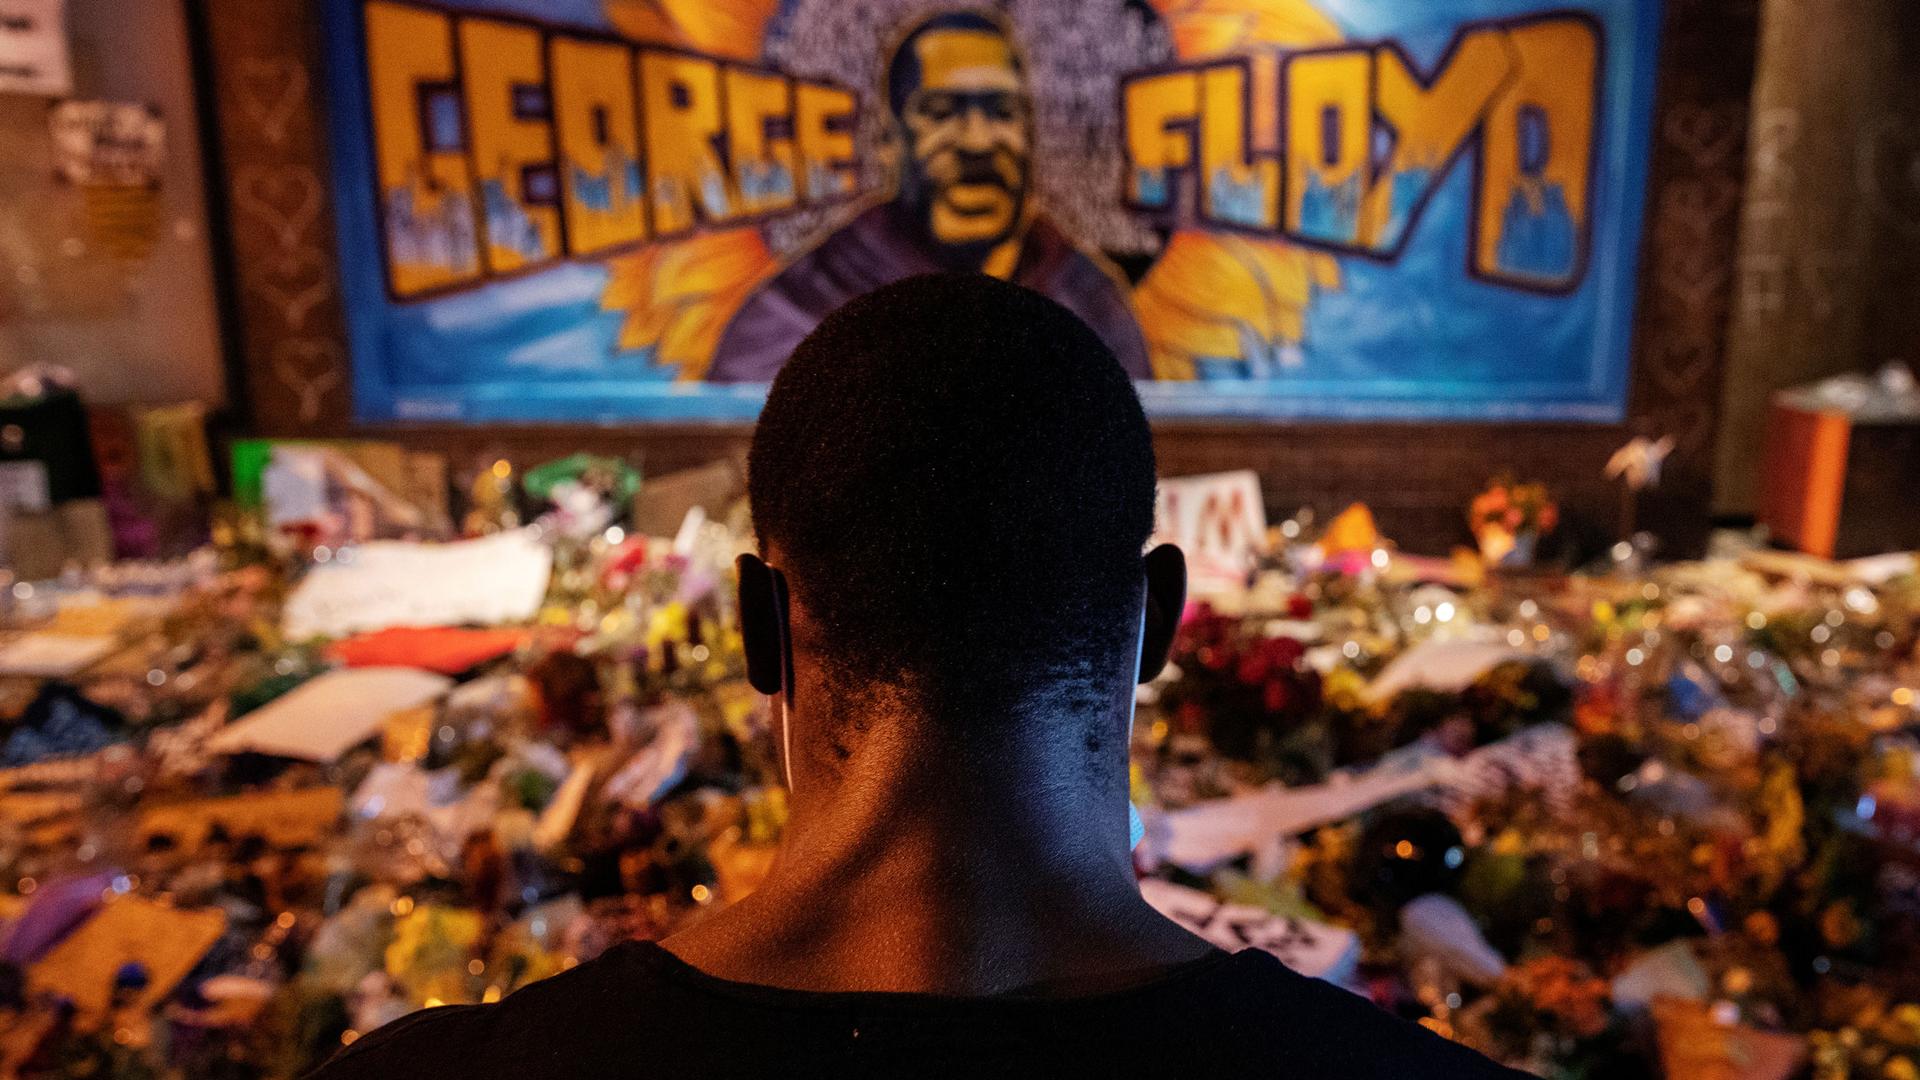 A man recites spoken word poetry at a makeshift memorial honoring George Floyd at the spot where he was taken into custody, in Minneapolis, June 1, 2020.